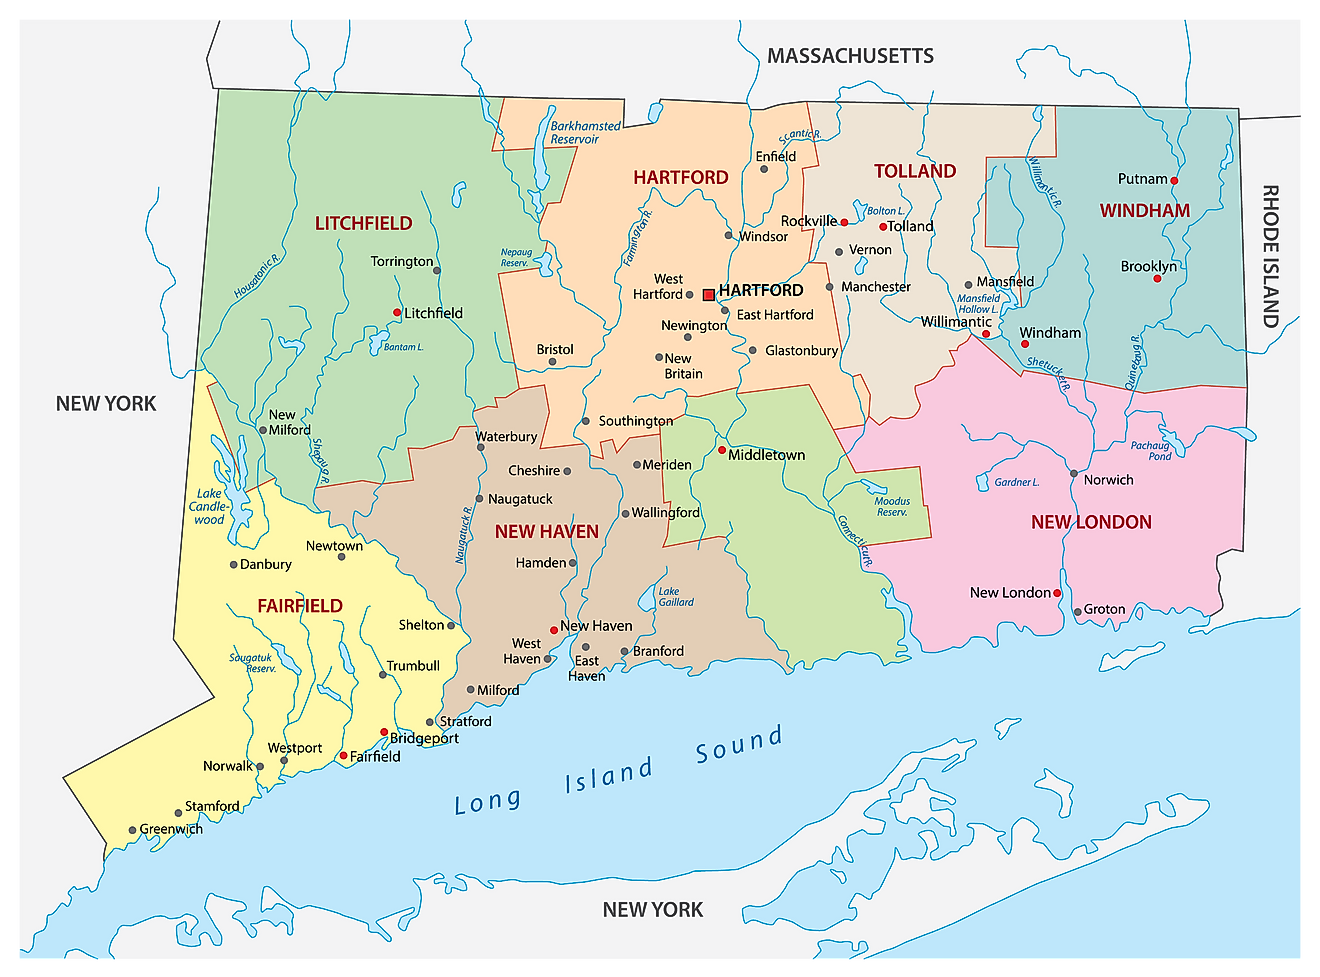 Administrative Map of Connecticut showing its 8 counties and the capital city - Hartford